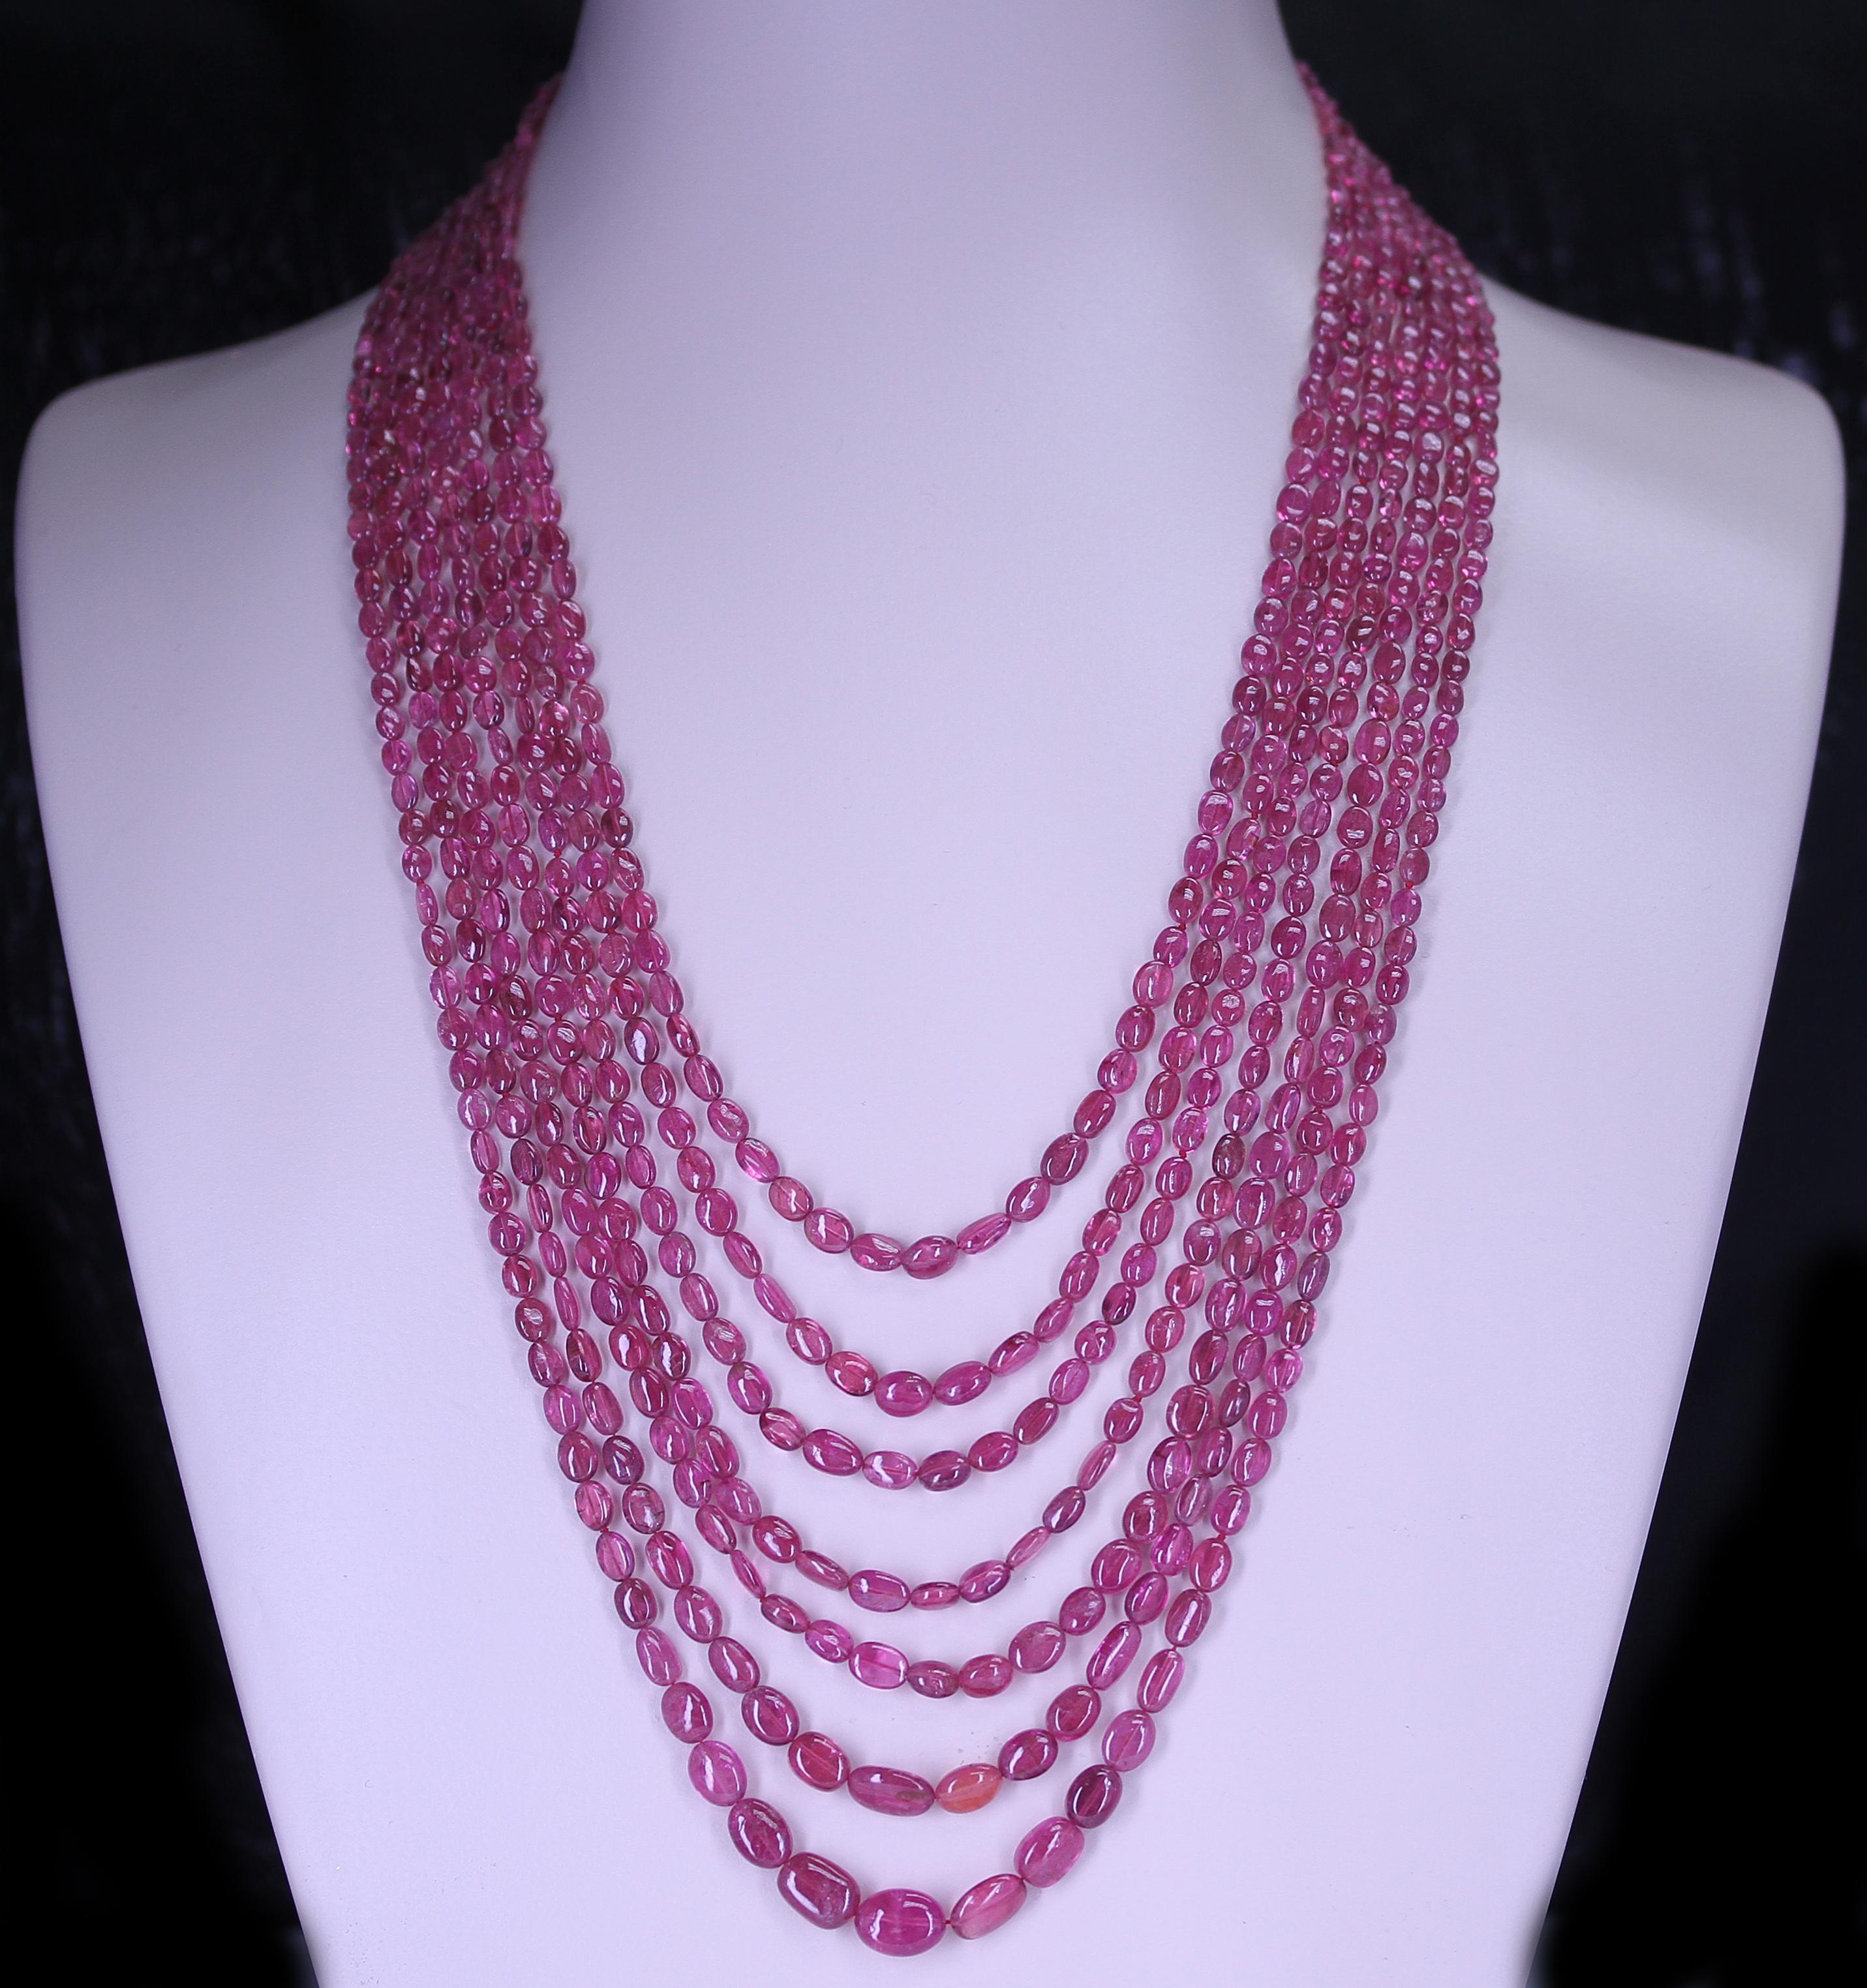 A Genuine & Natural Smooth Pink Tourmaline Small Tumbled Beads Necklace with 7 Lines, weighing 514 carats. The clasp is 14K Yellow Gold, and the length of the strands range from 23